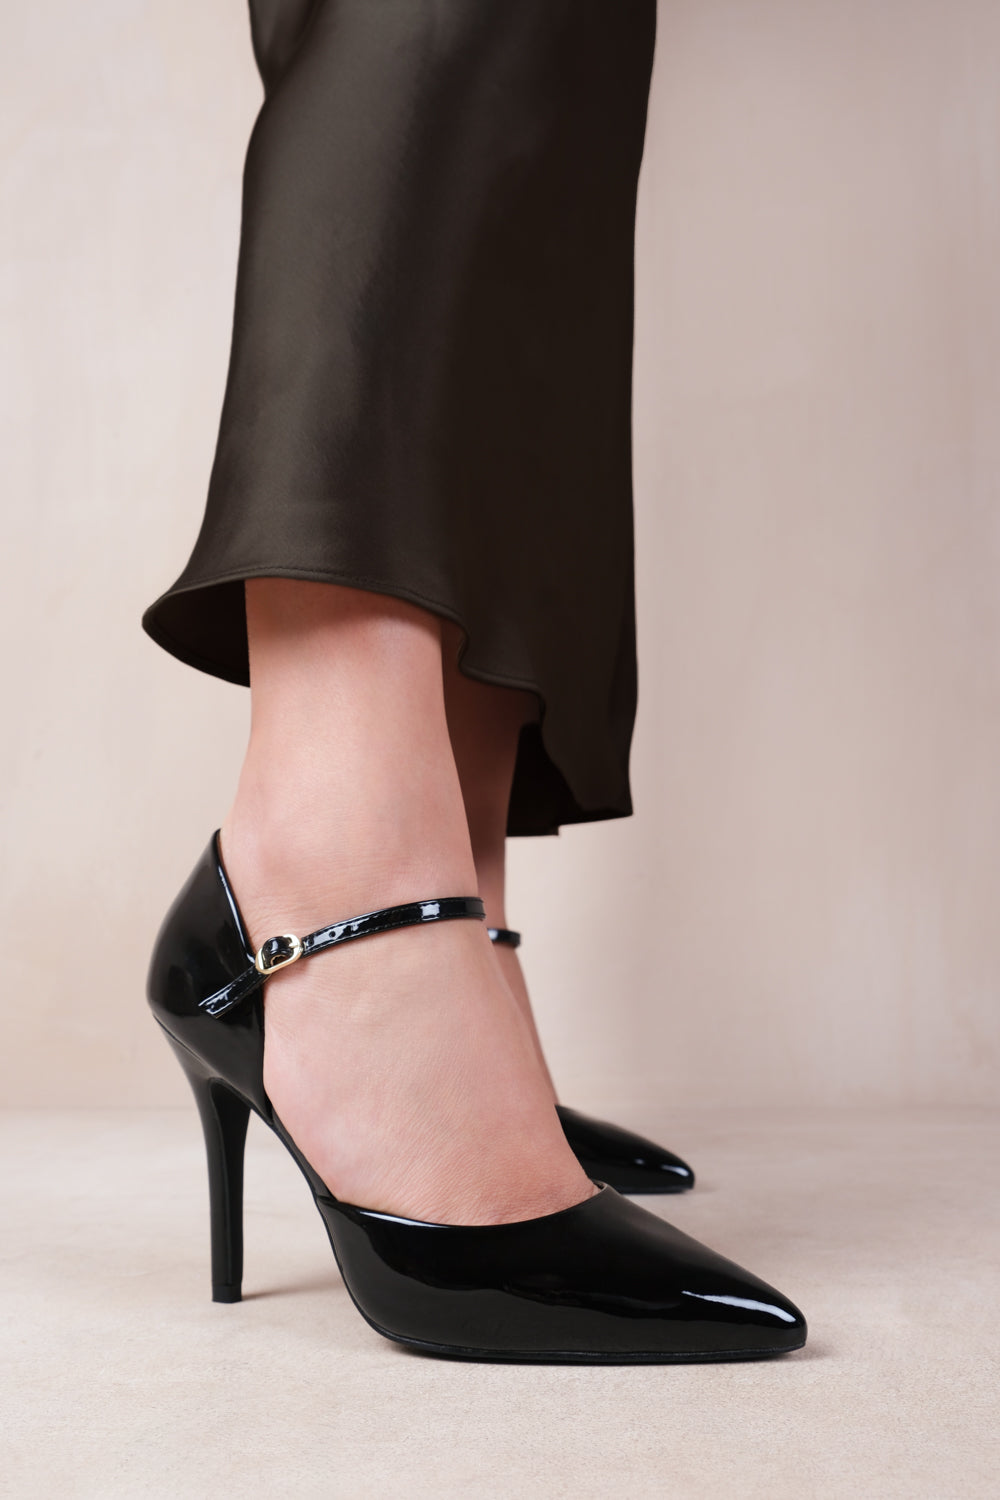 REFLEX WIDE FIT MID HIGH HEELS WITH POINTED TOE IN BLACK PATENT